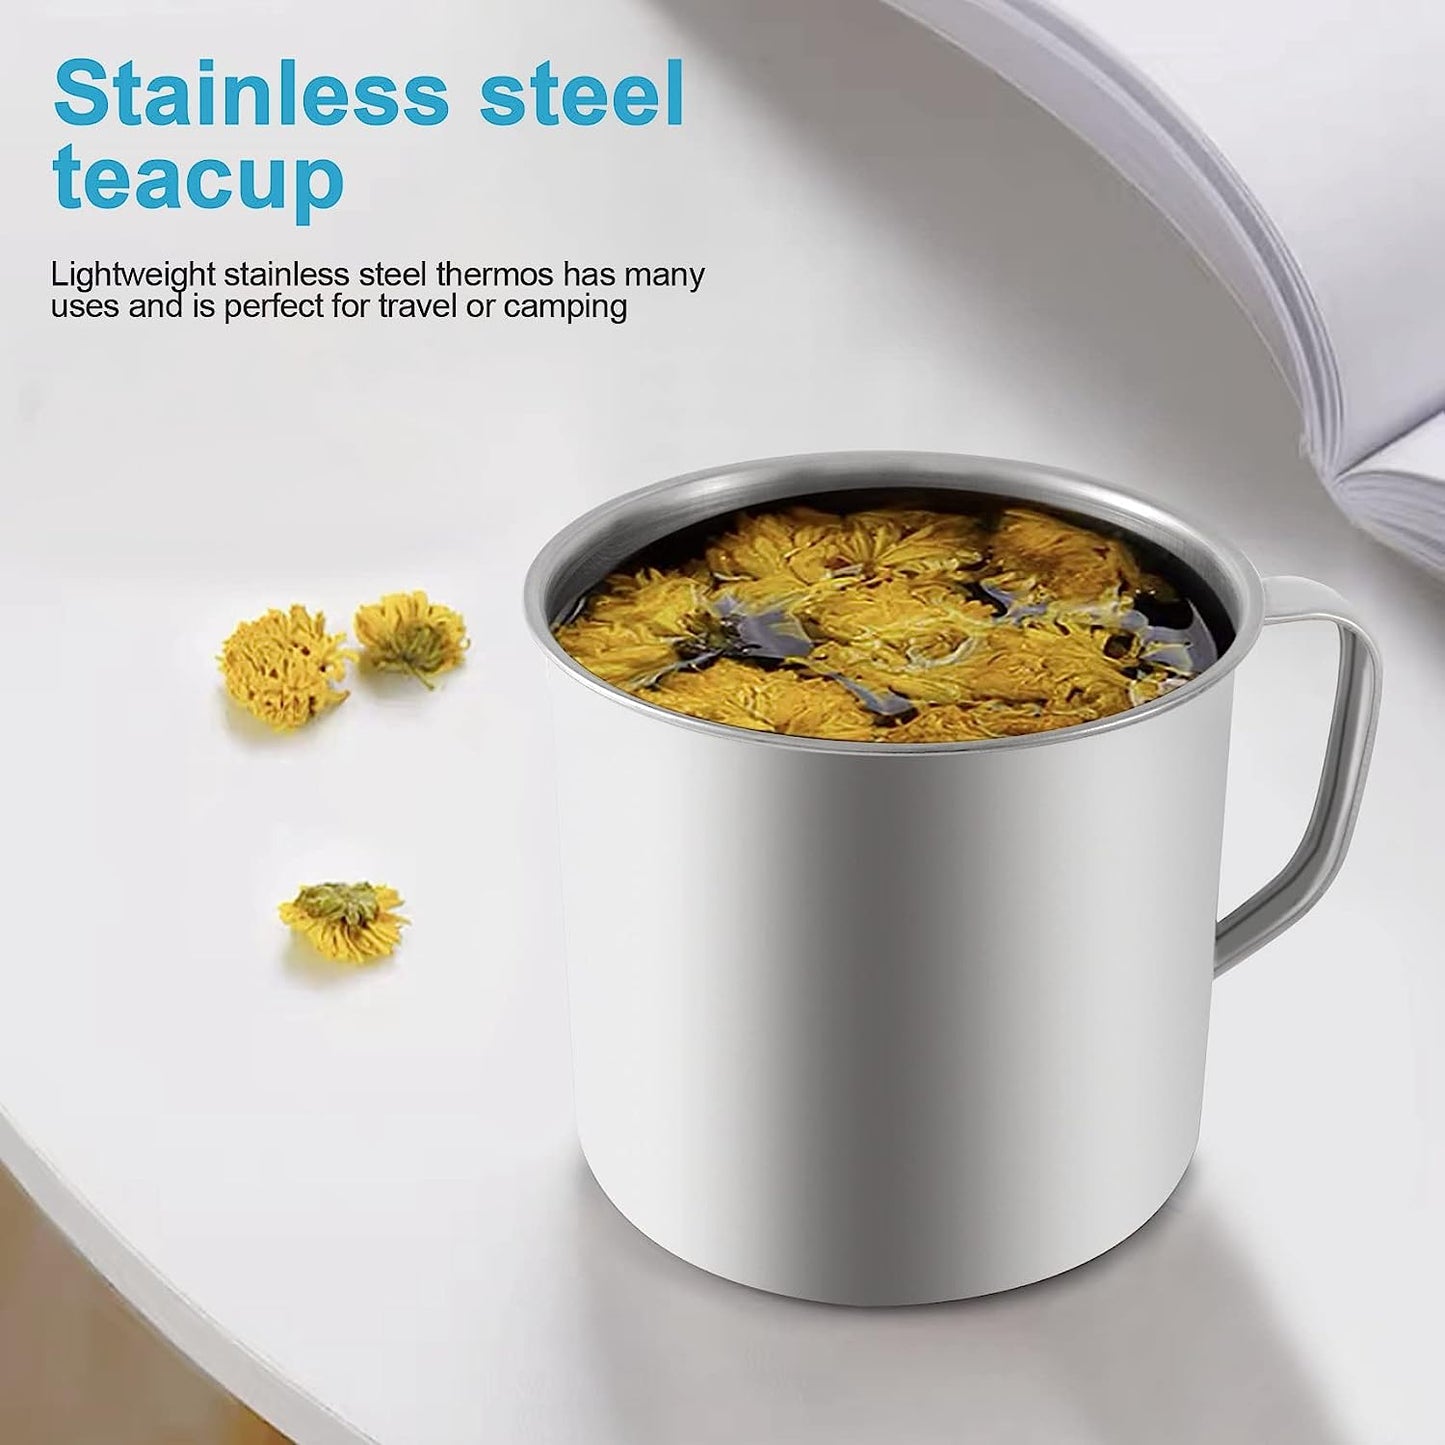 500ml Stainless Steel Cup